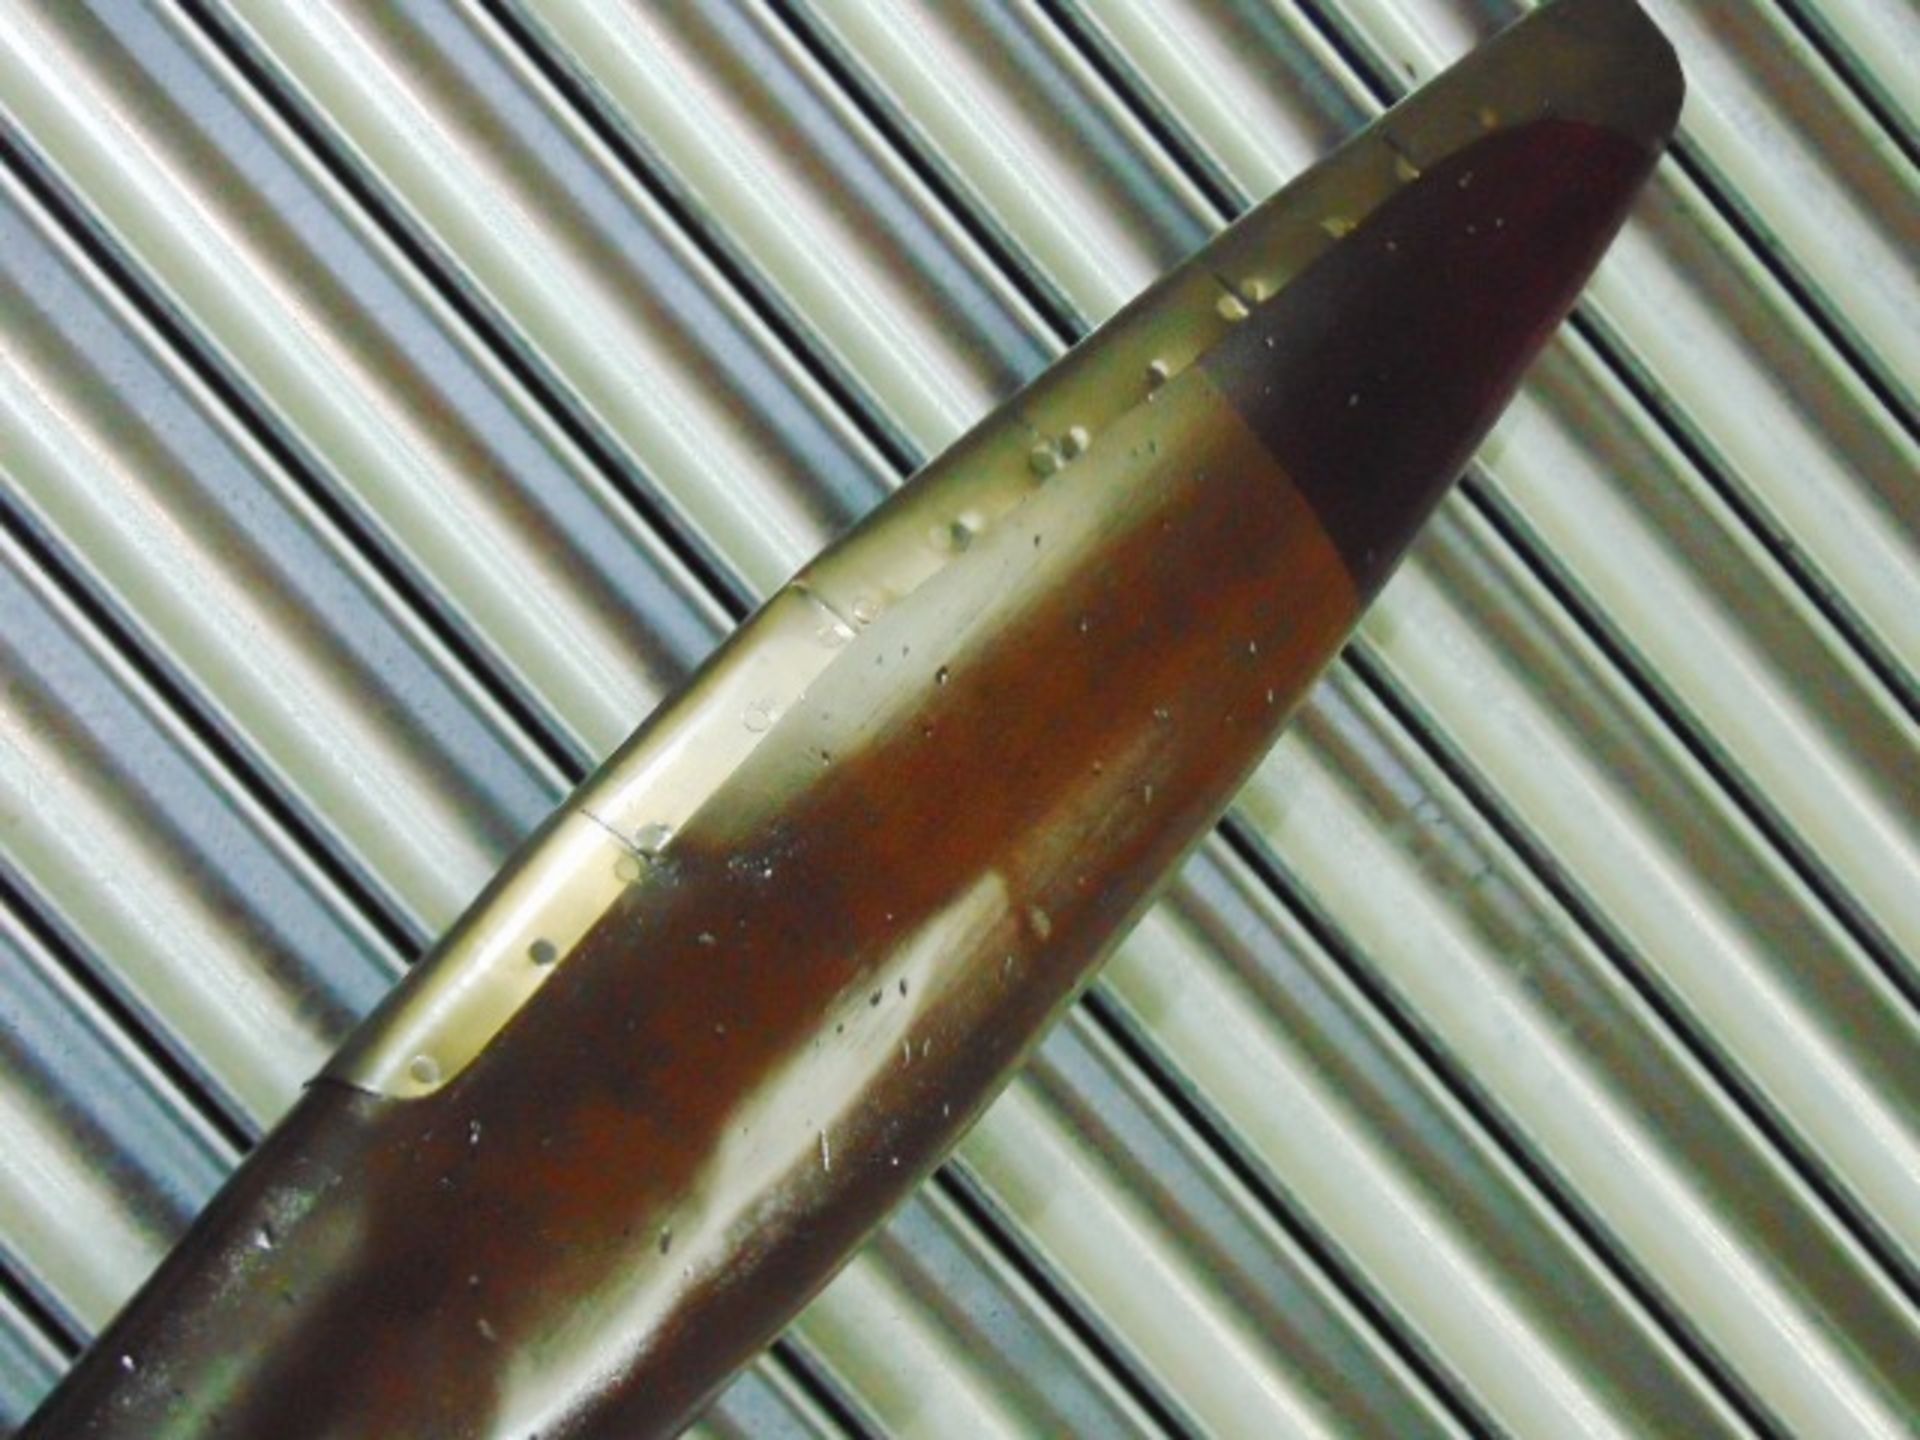 Metal Clad Wooden Aircraft Propeller - Image 3 of 4